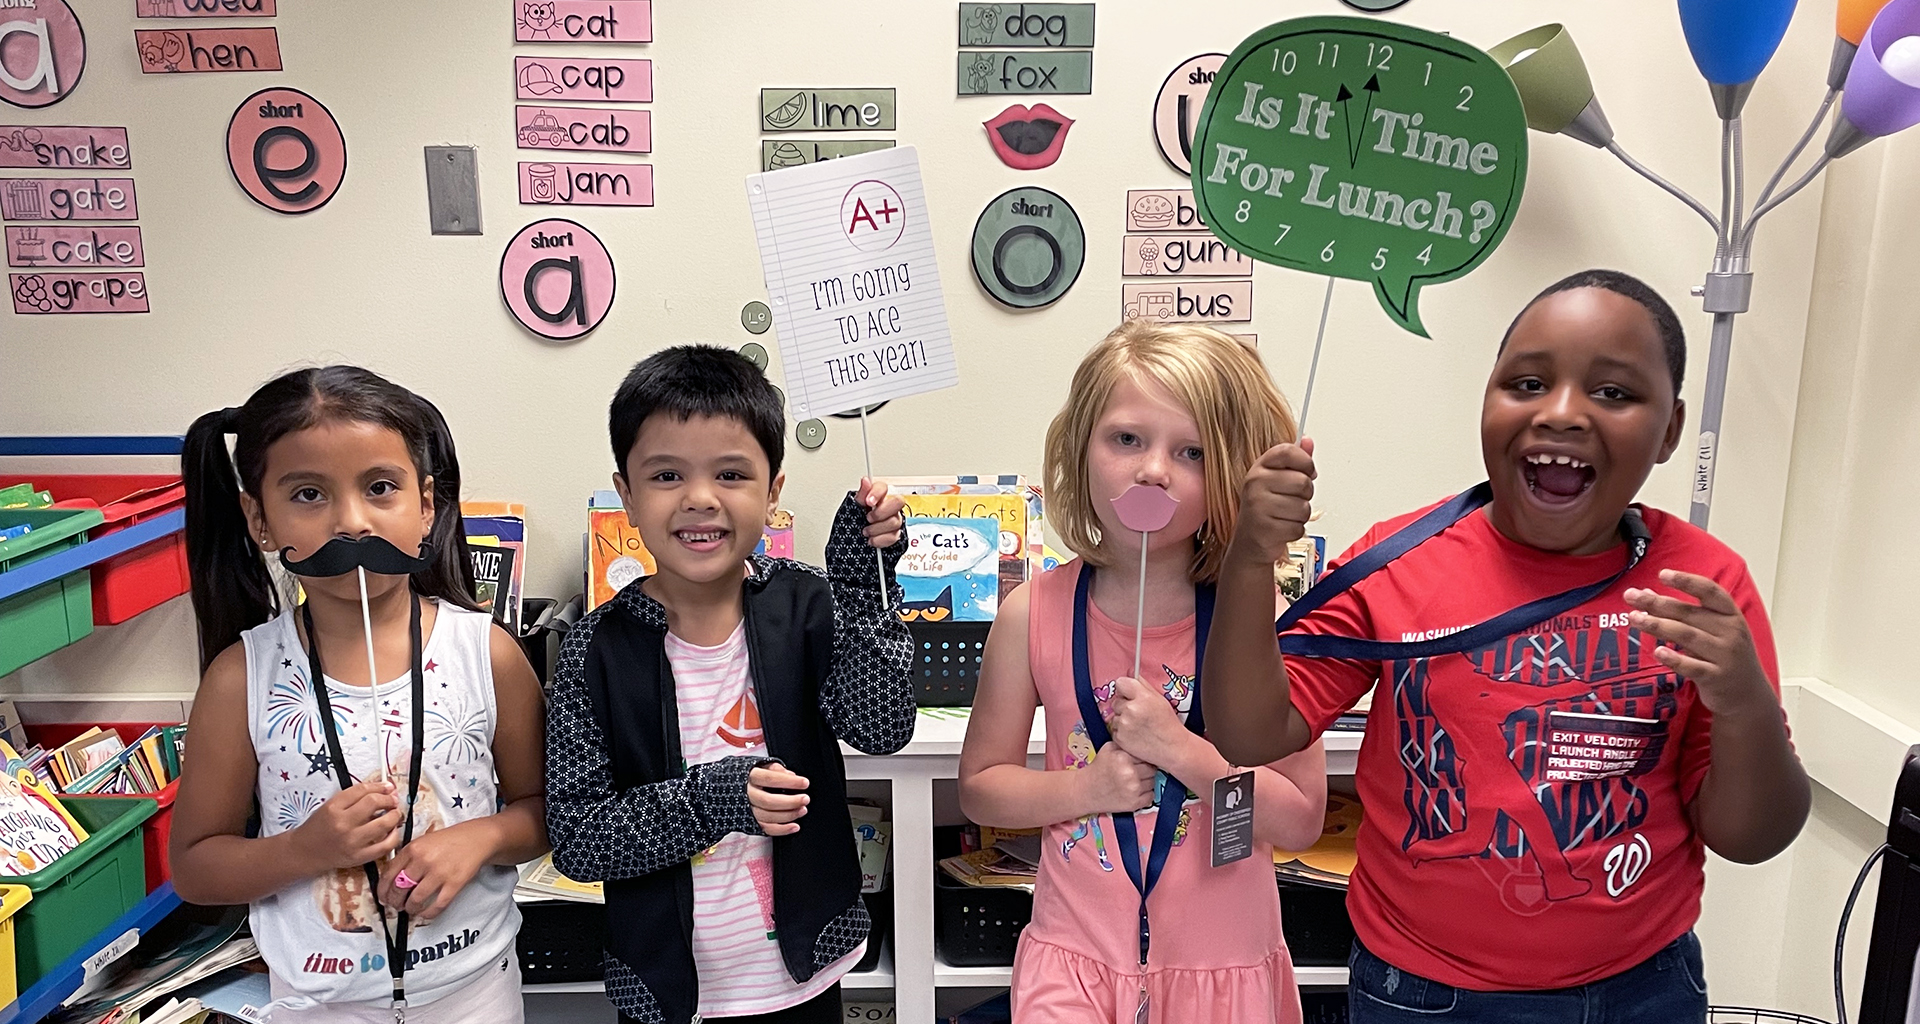 Four students pose with photo booth props for a fun picture